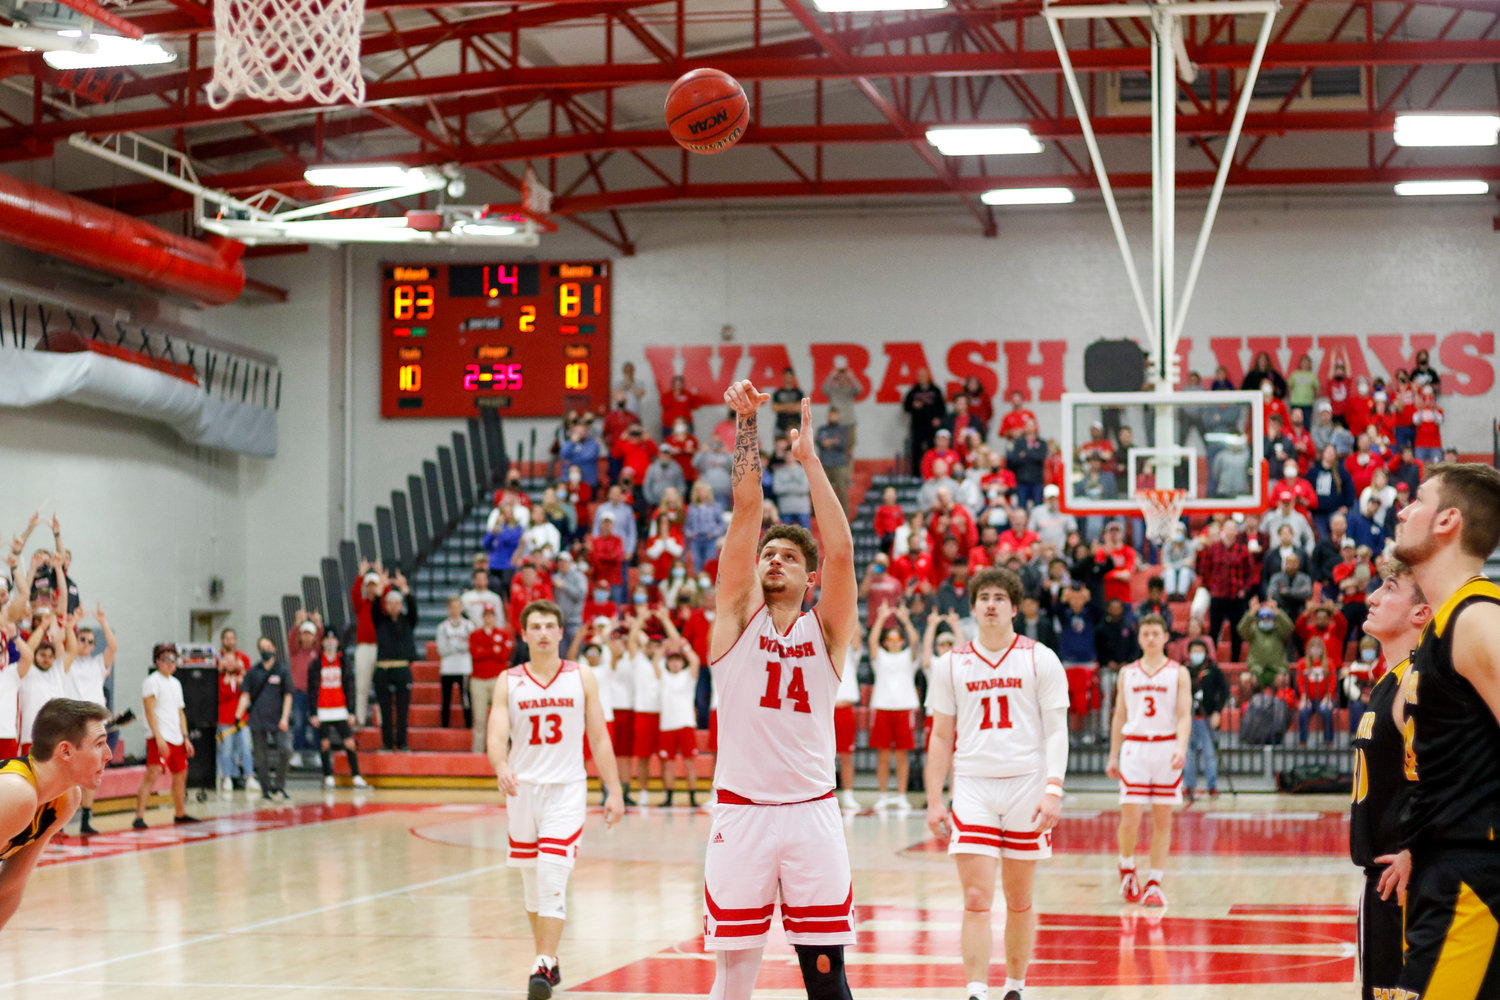 Senior captain Ahmoni Jones is the lone senior for the Little Giants this season. He alongside a plethora of juniors will look to lead Wabash to another North Coast Athletic Conference title.